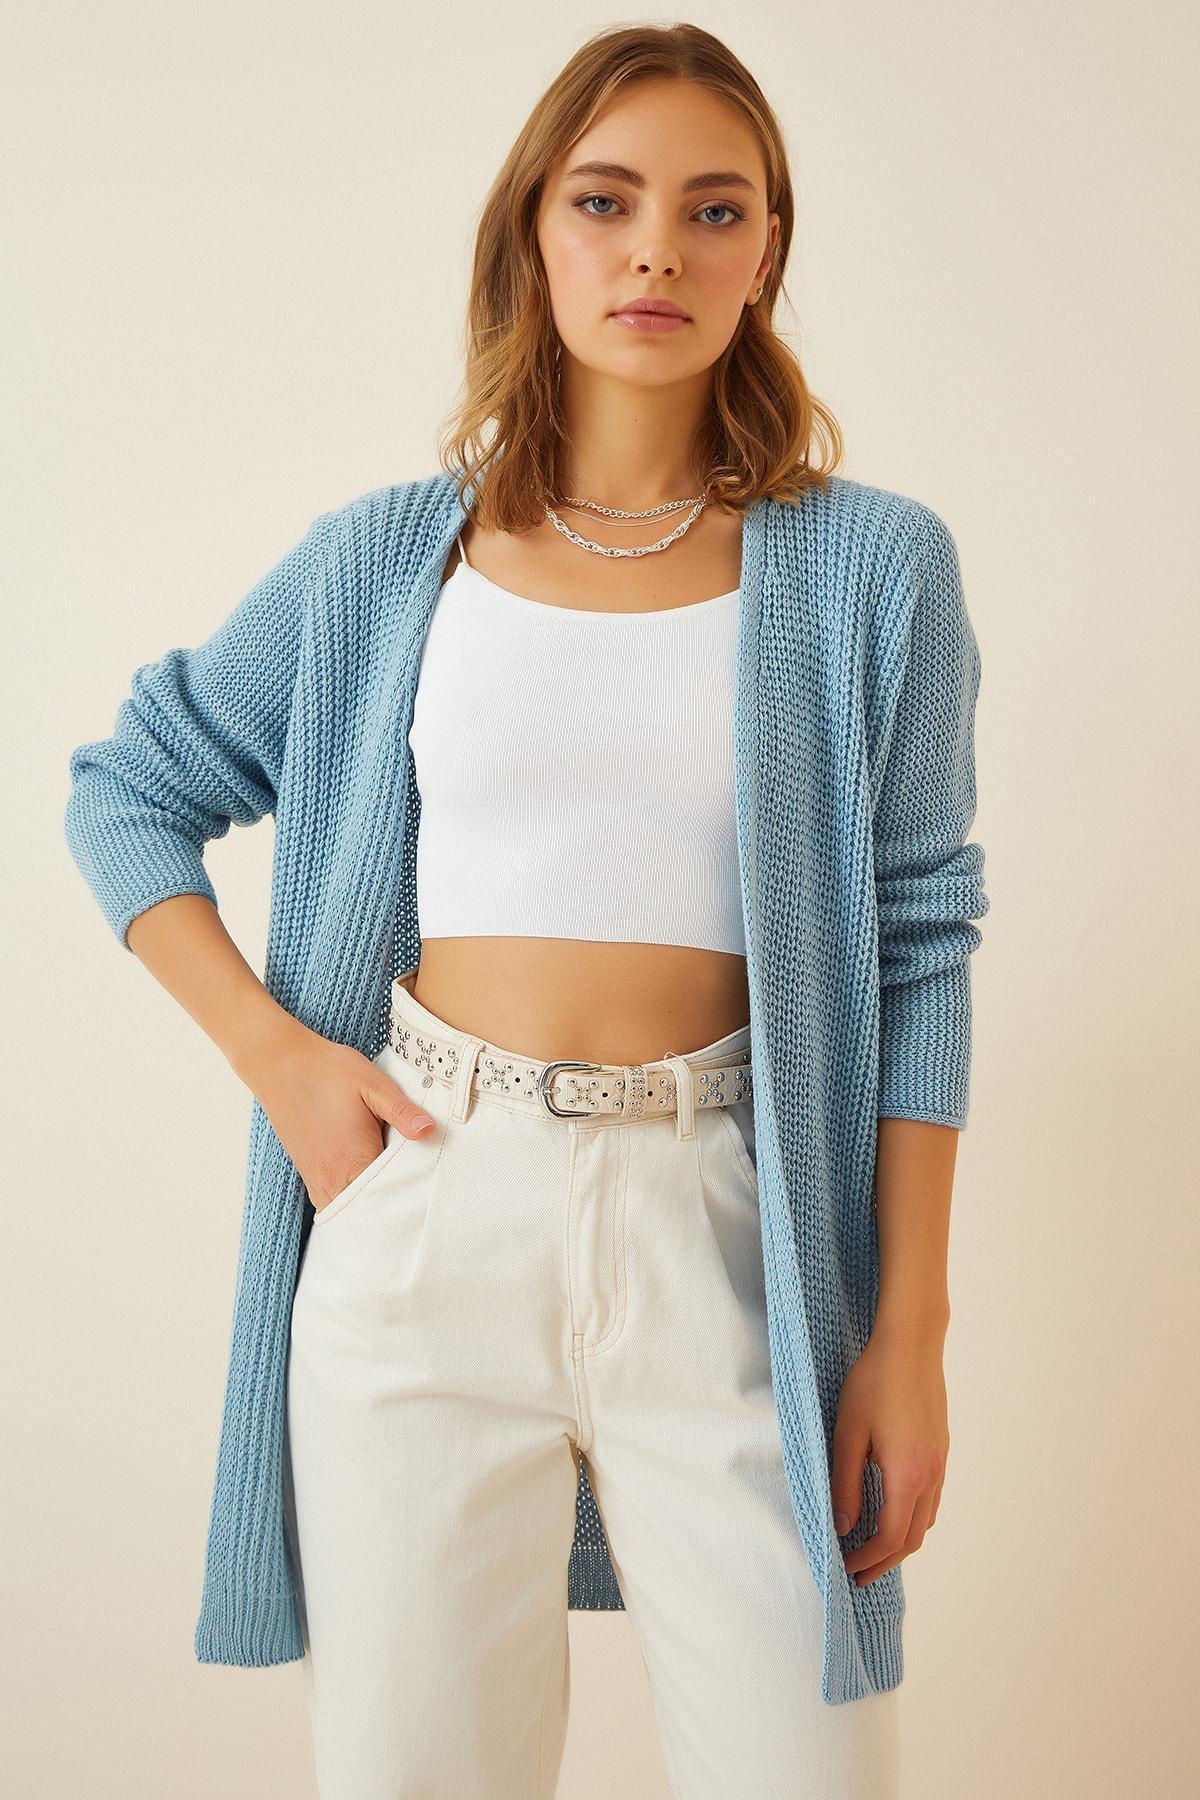 Happiness Istanbul - Blue Knitted Cardigan